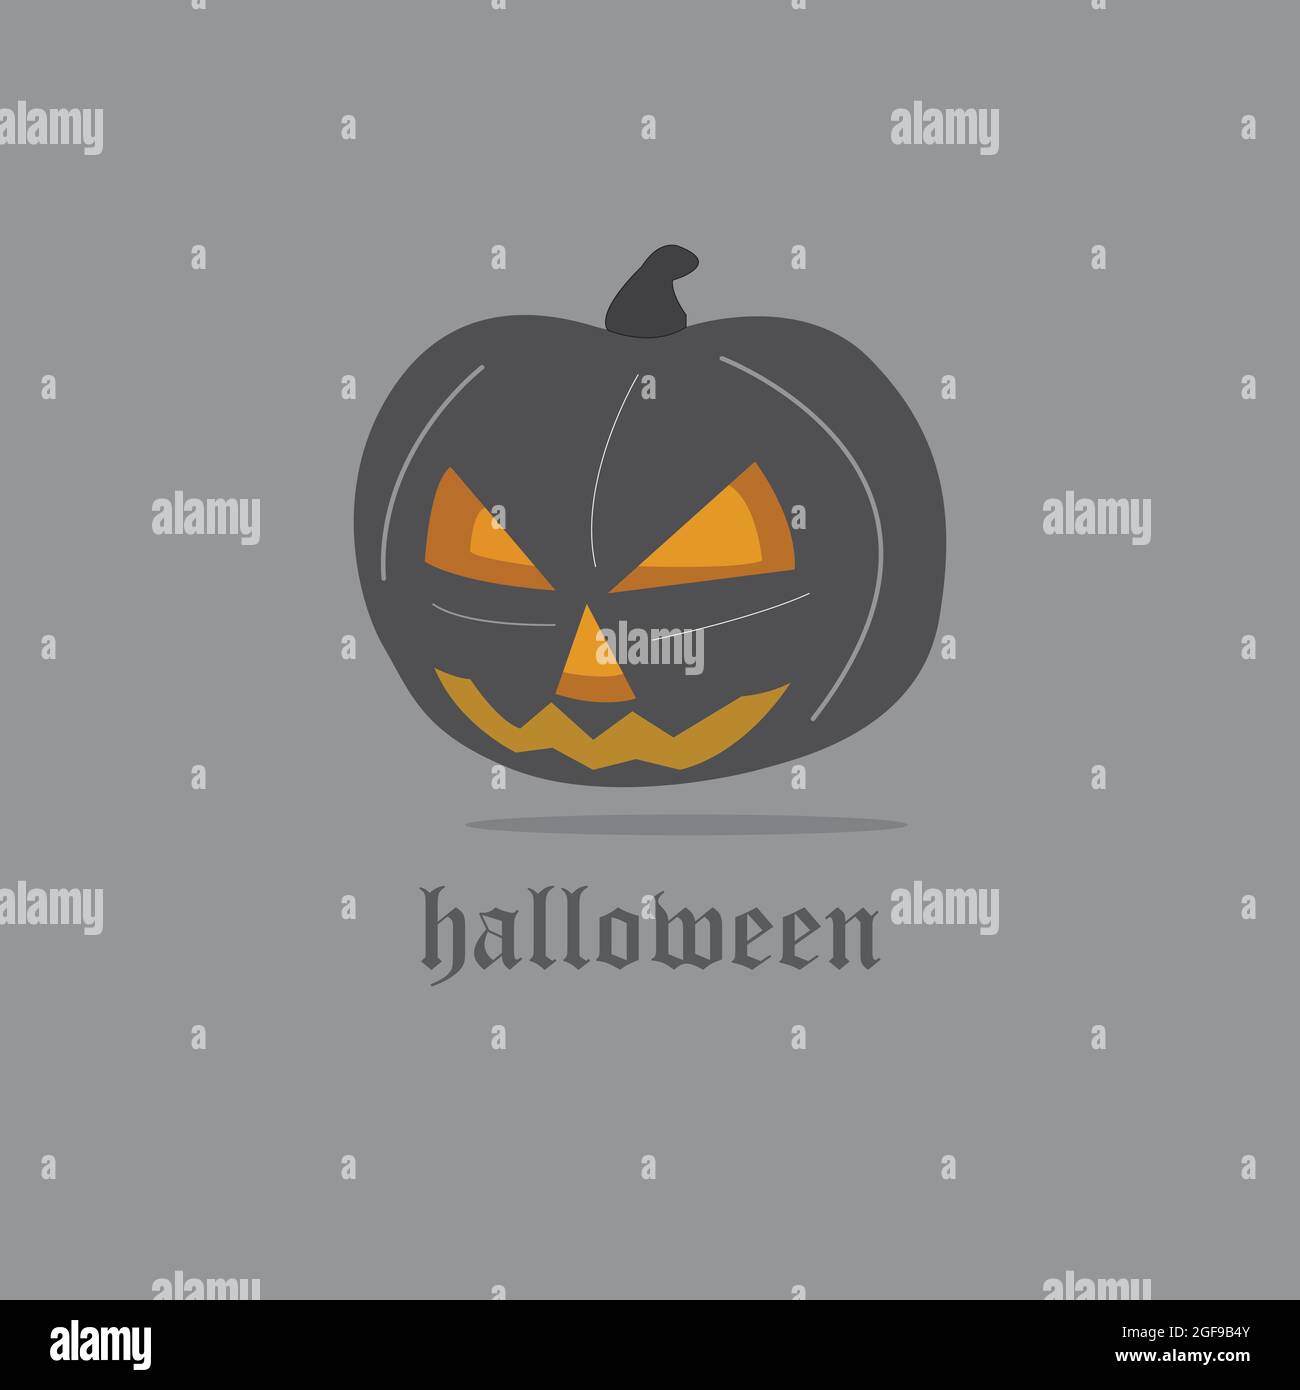 Halloween vector black edition, the illustration can be used for news, website, favicon, and more Stock Vector